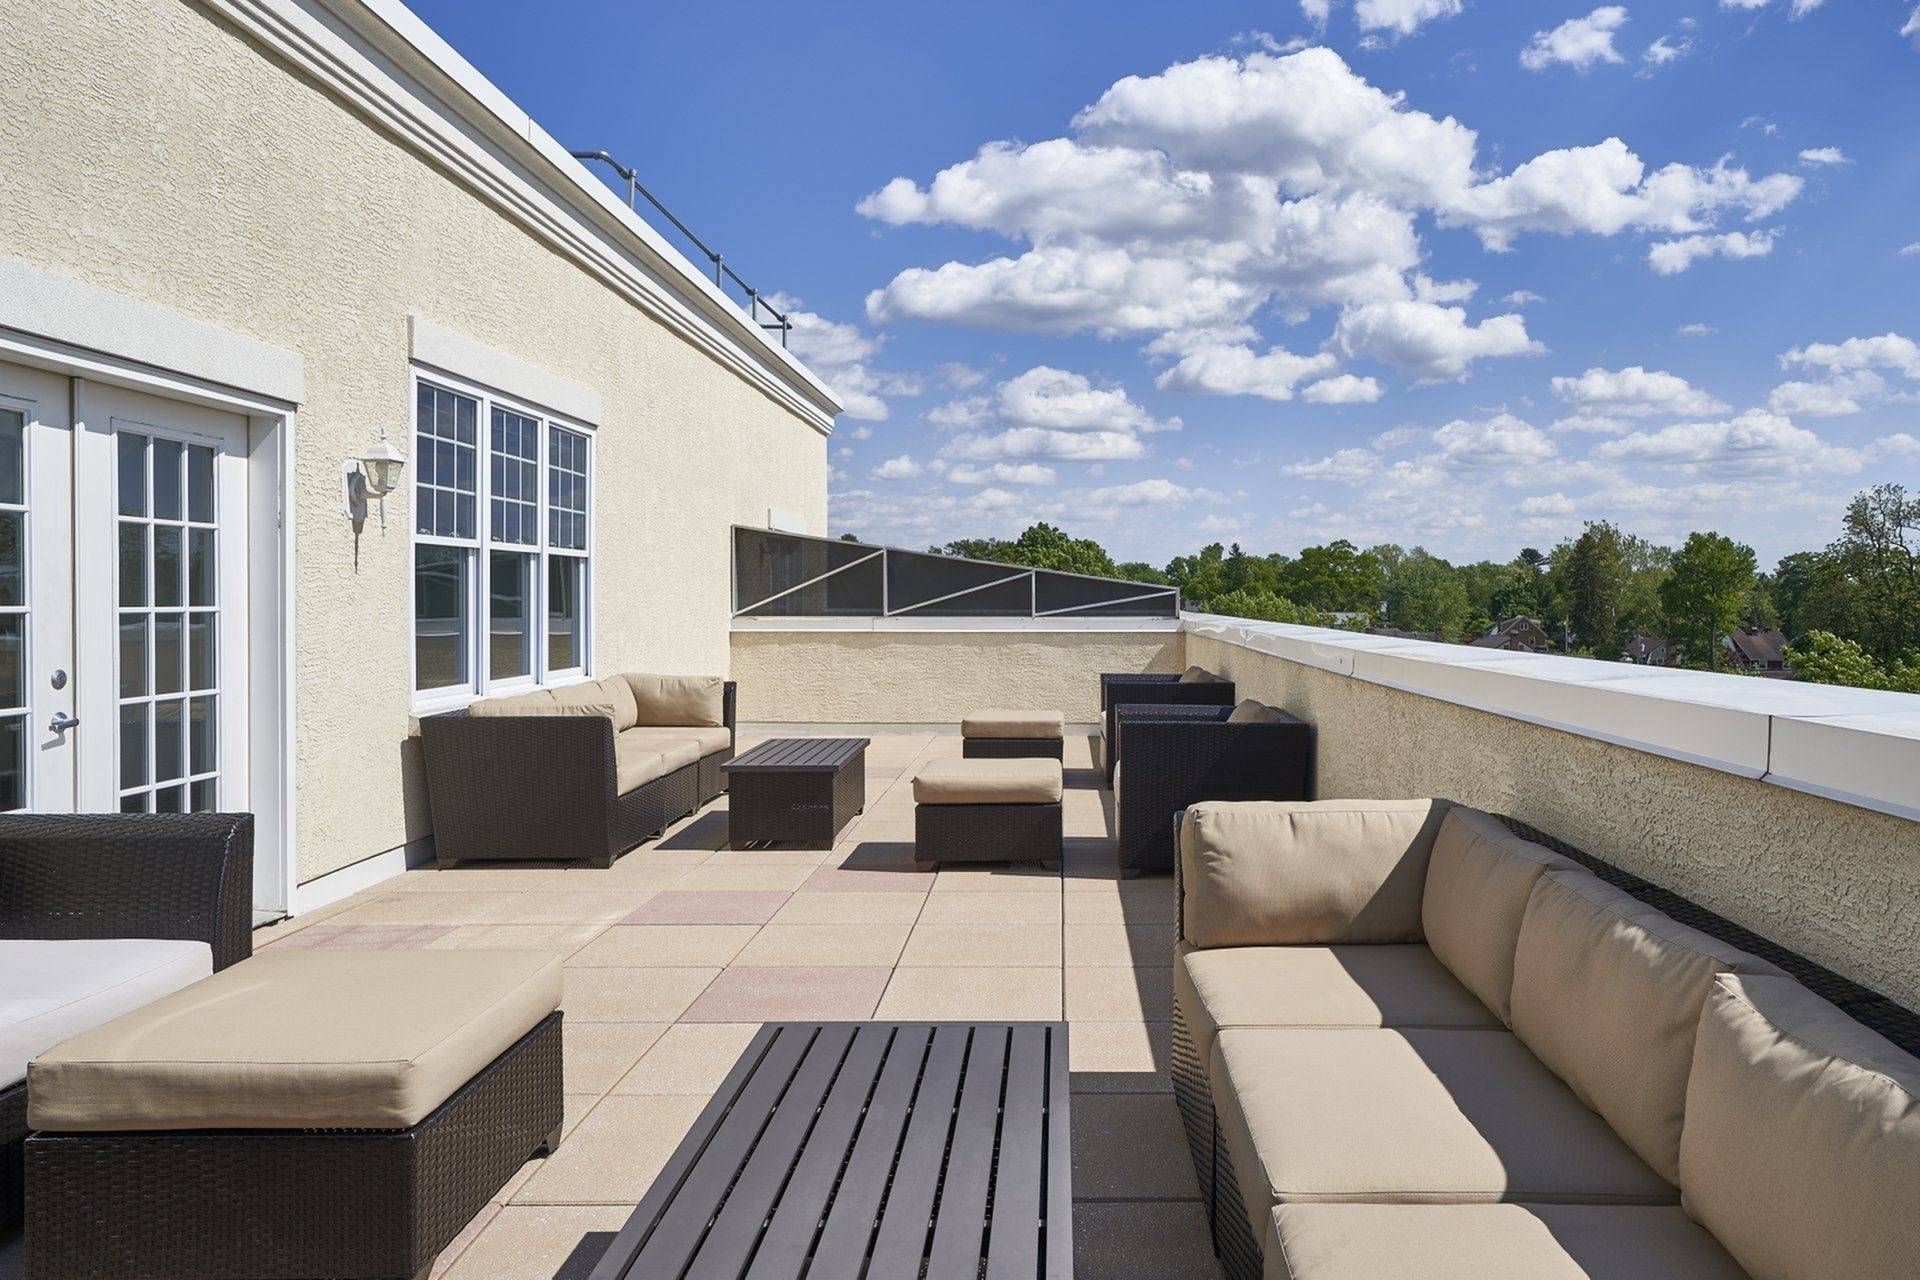 Ardmore PA Apartments - The Athens - Rooftop Terrace with Lounge Seating, Tables, and City View